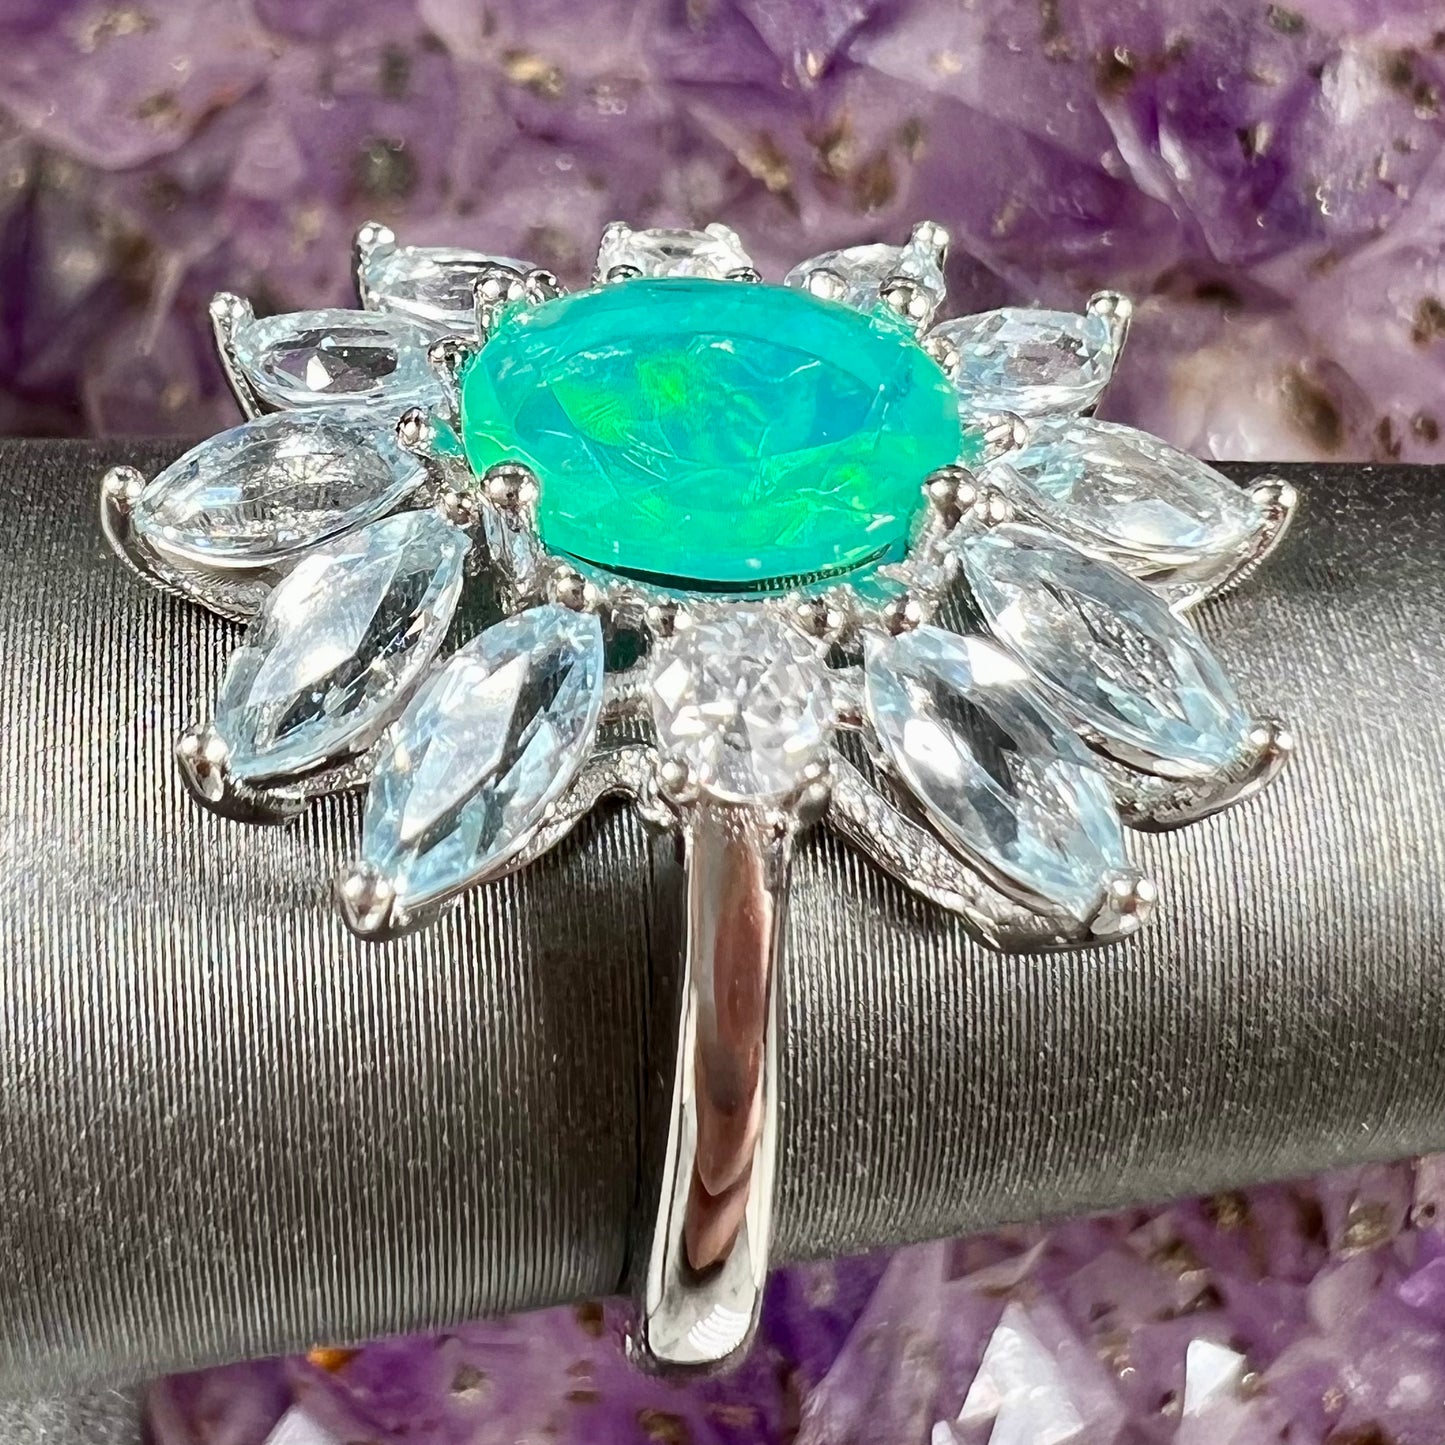 A faceted oval cut blue Ethiopian fire opal set in a sterling silver ring with marquise cut blue topaz stones.